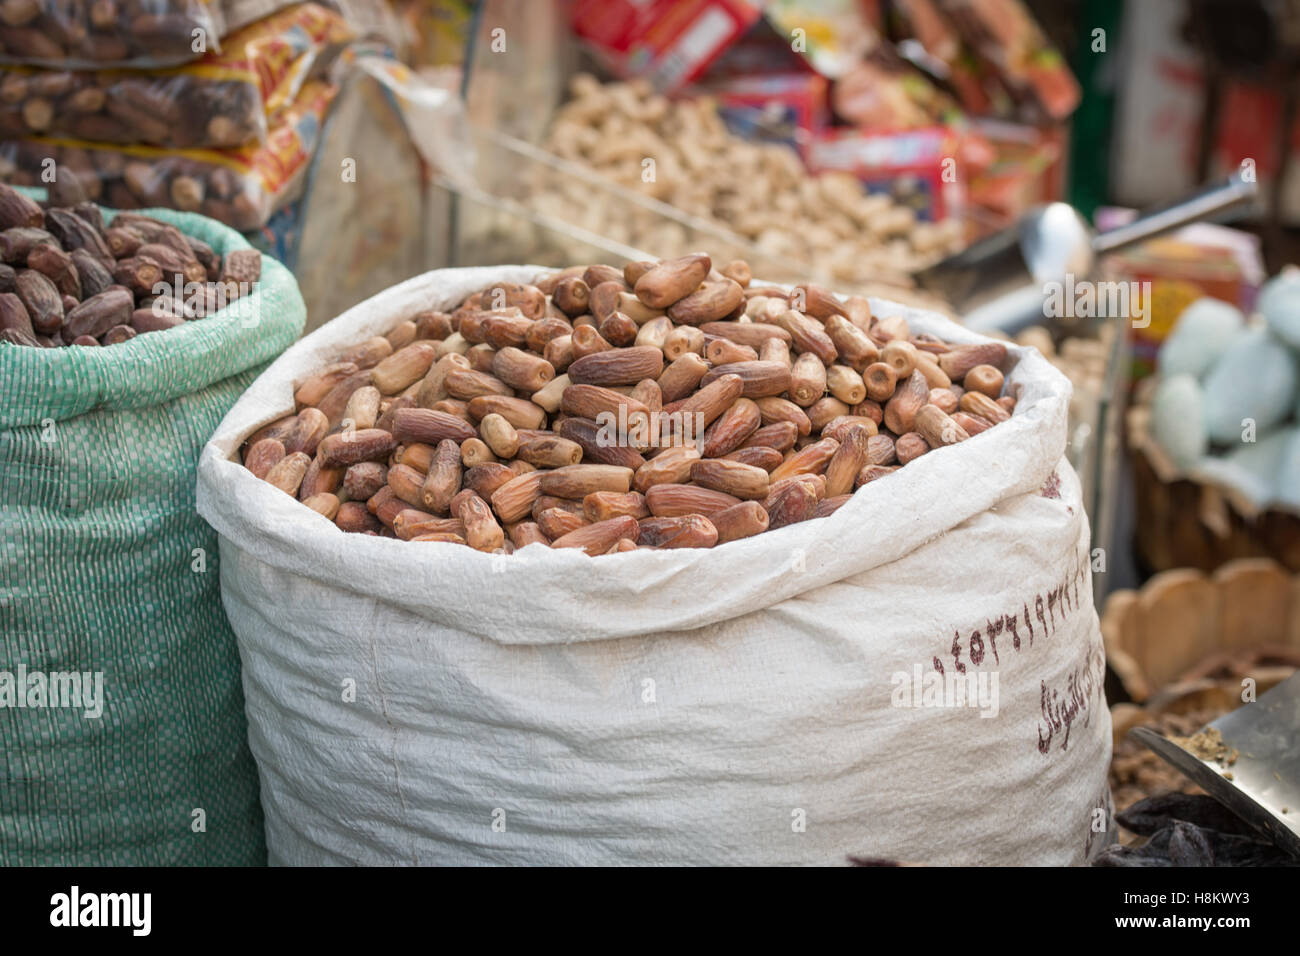 Cairo, Egypt. Close up of dates for sale in the outdoor bazaar/ flea market Khan el-Khalili in Cairo. Stock Photo